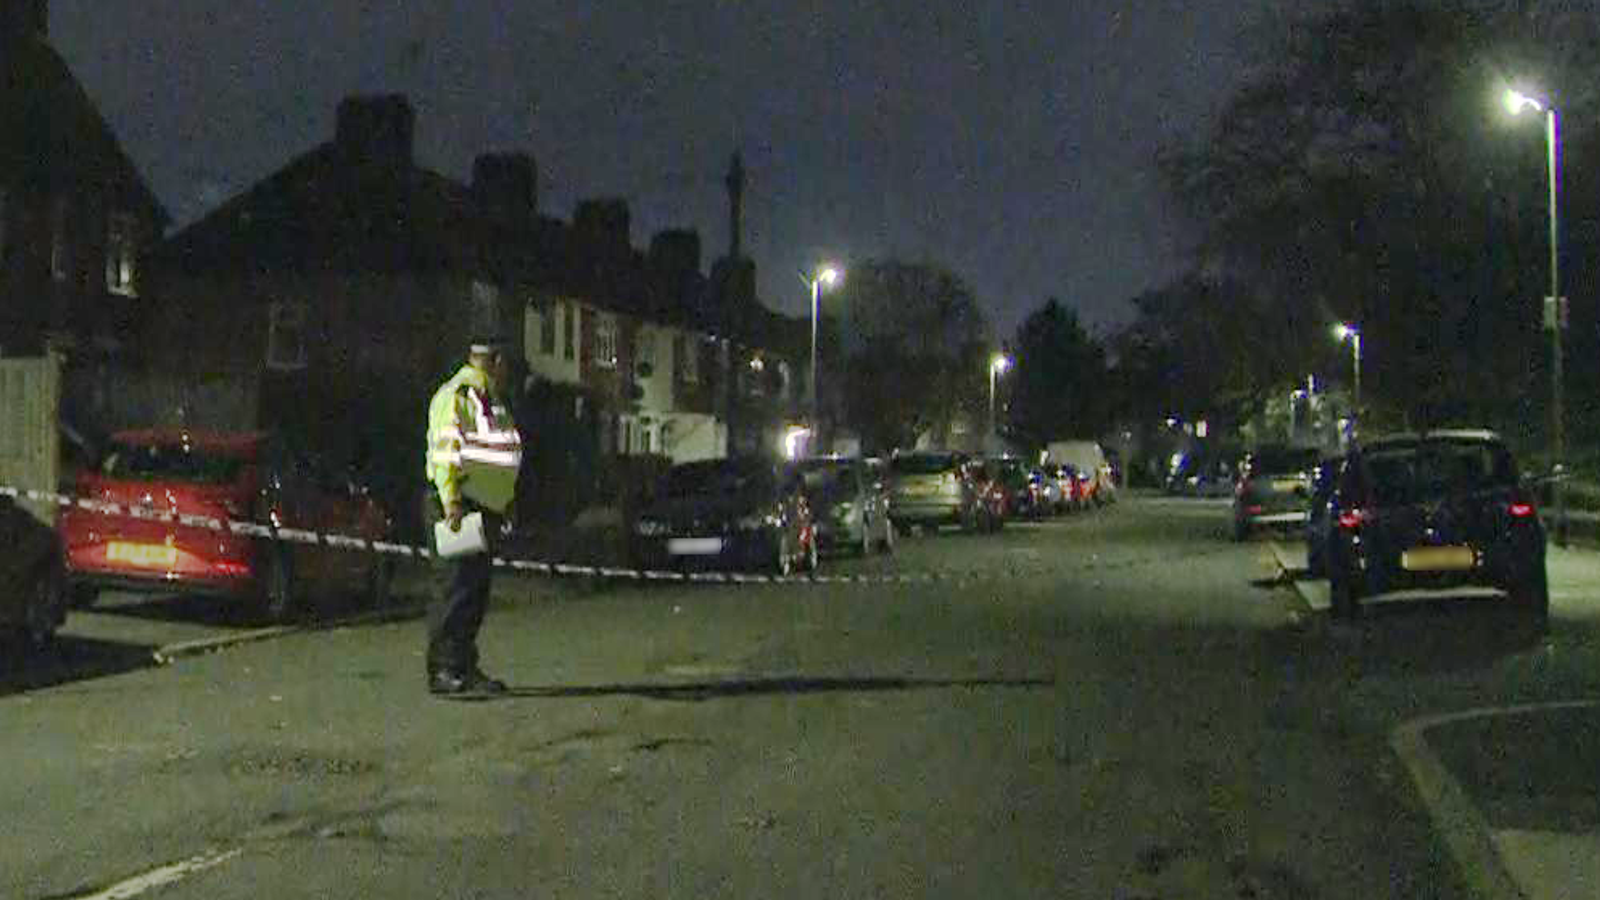 Dagenham: Man dies during stand-off with armed police